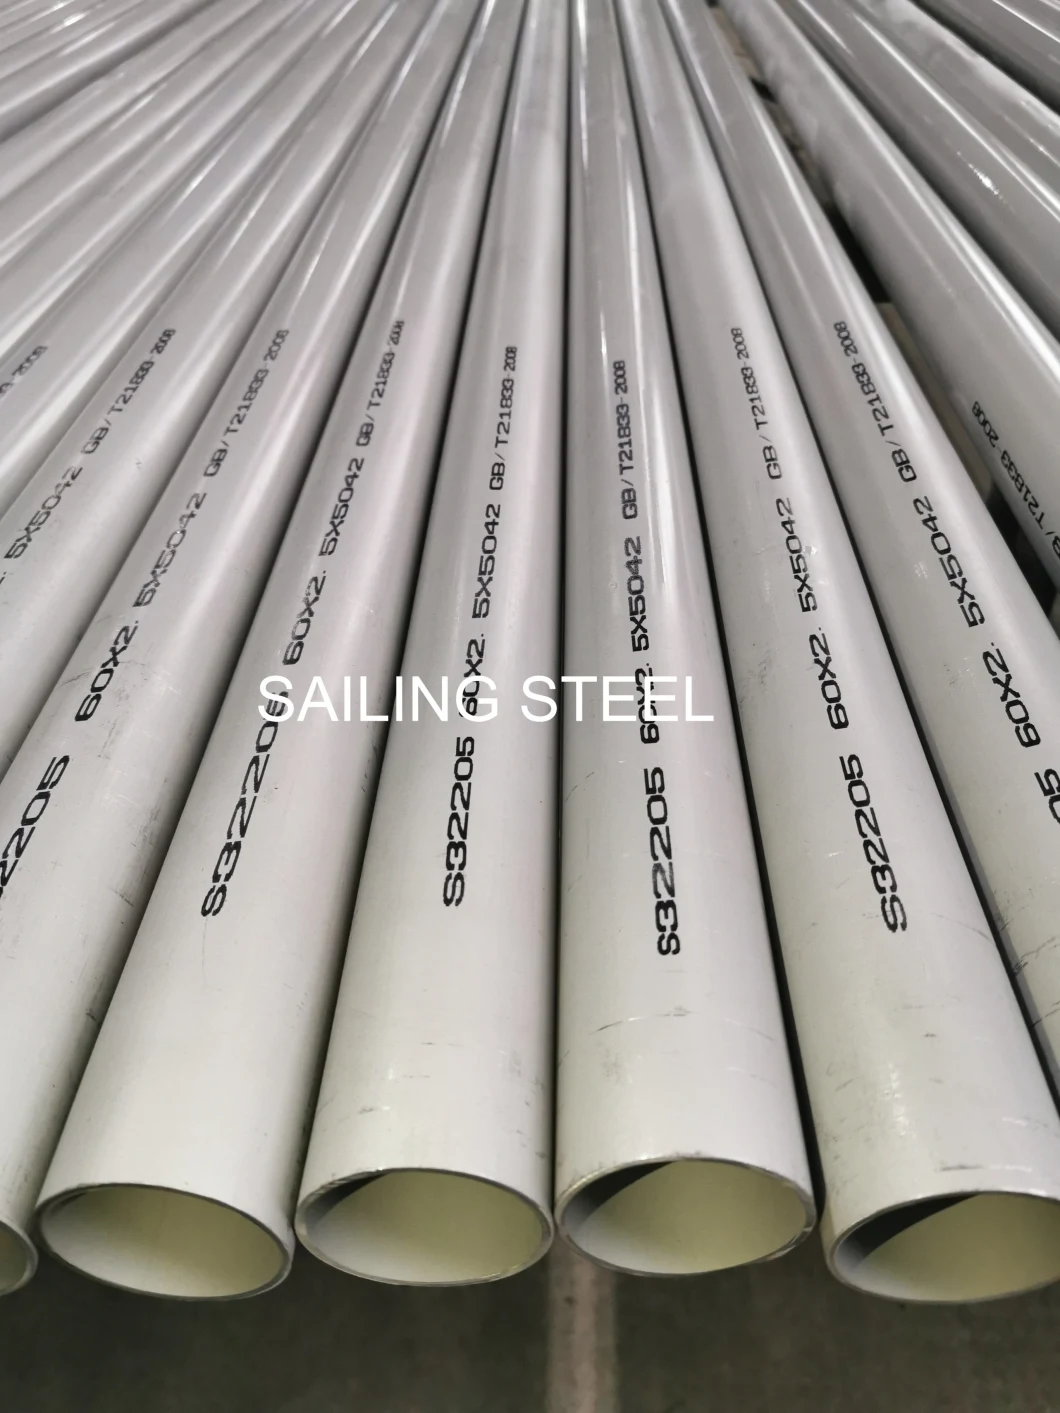 AISI 304/ 304L/ 316L/ 316ti/ Duplex Steel/ Ni-Based Alloy Stainless Steel Seamless Pipe